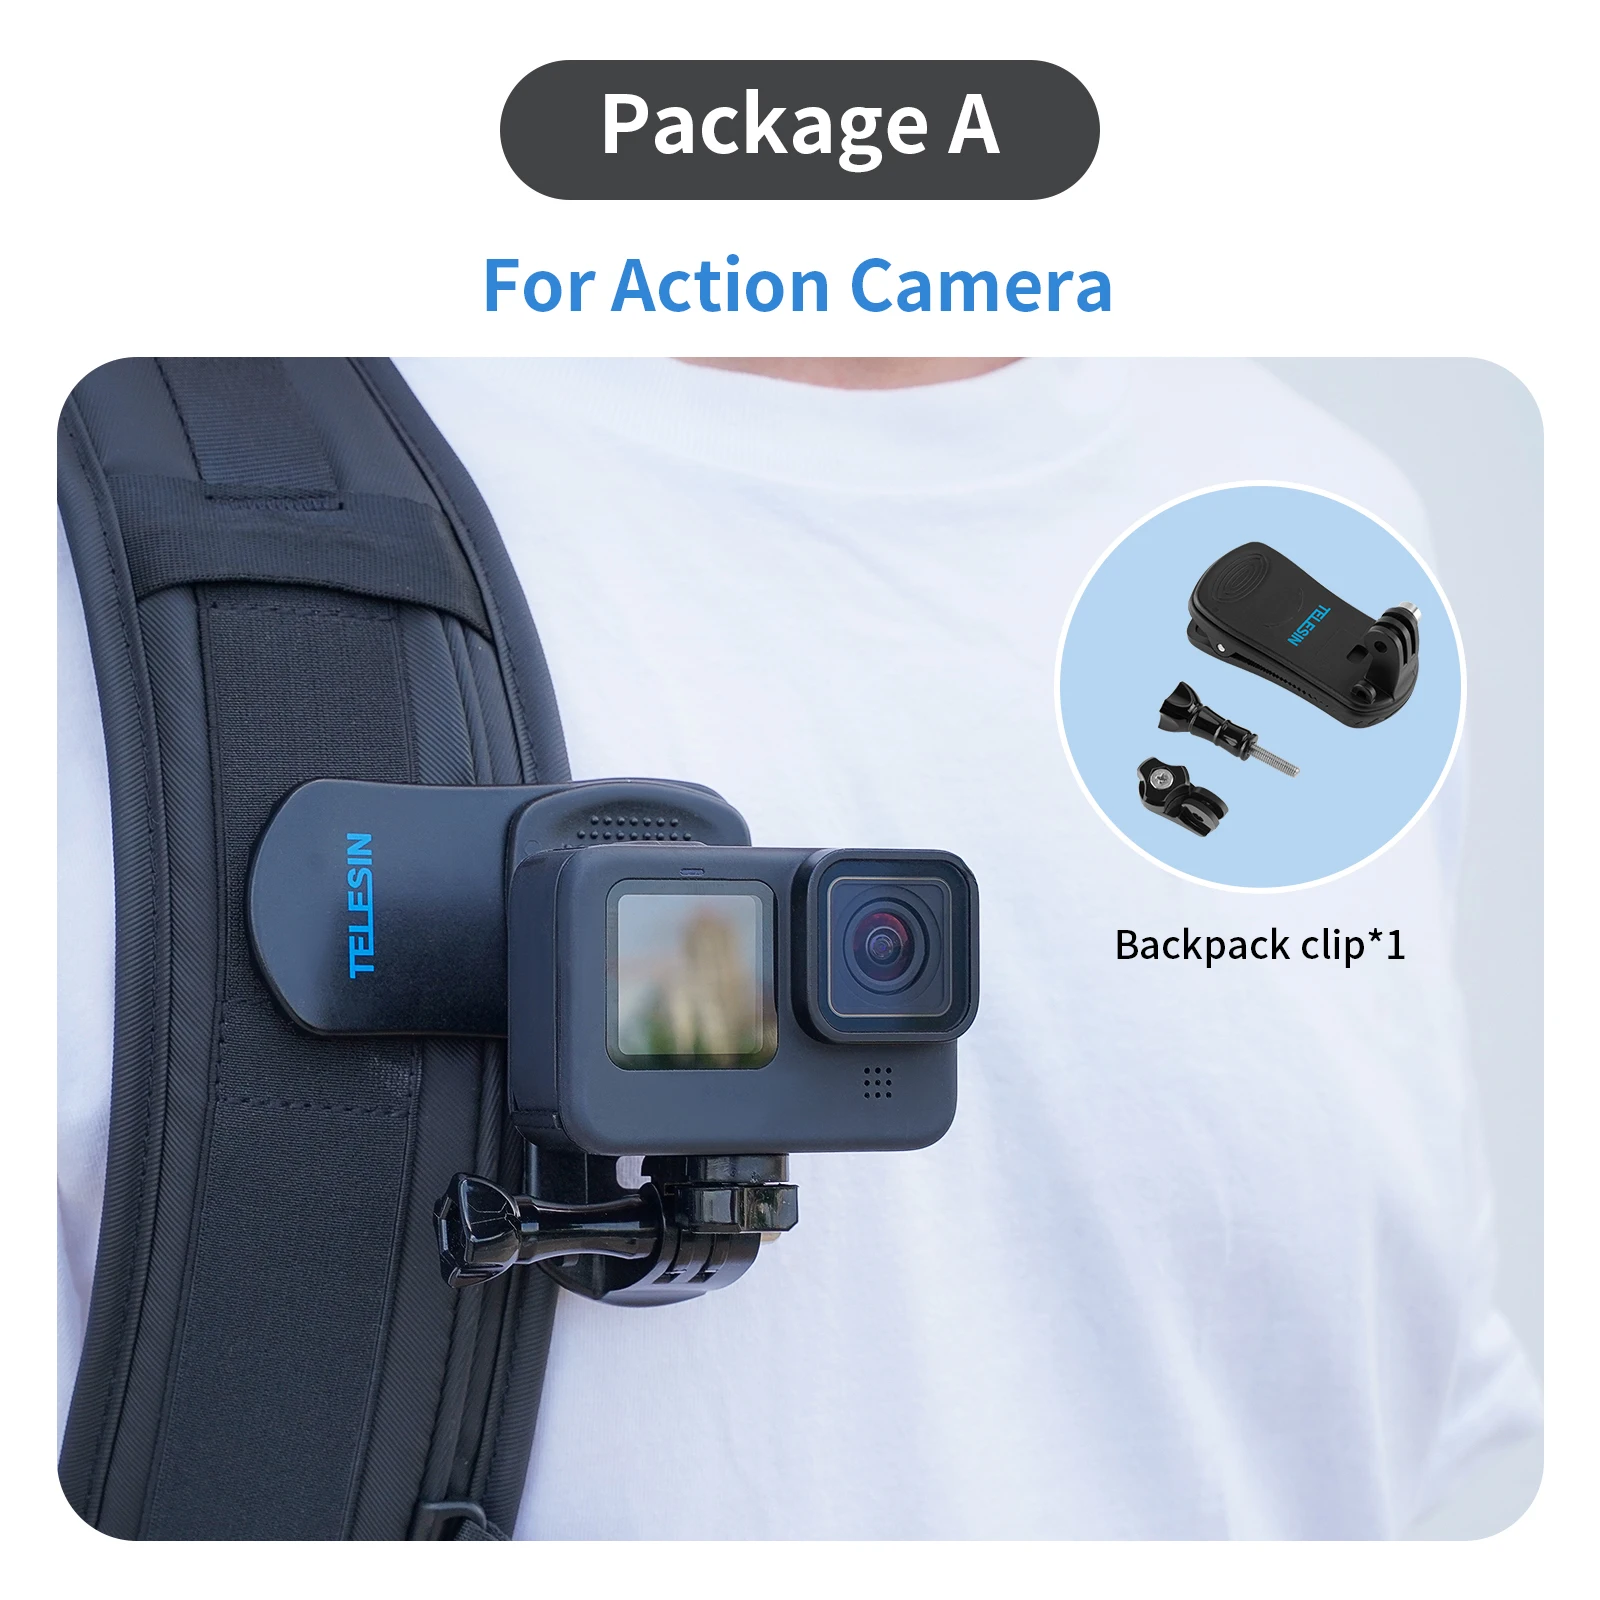 For Action Camera